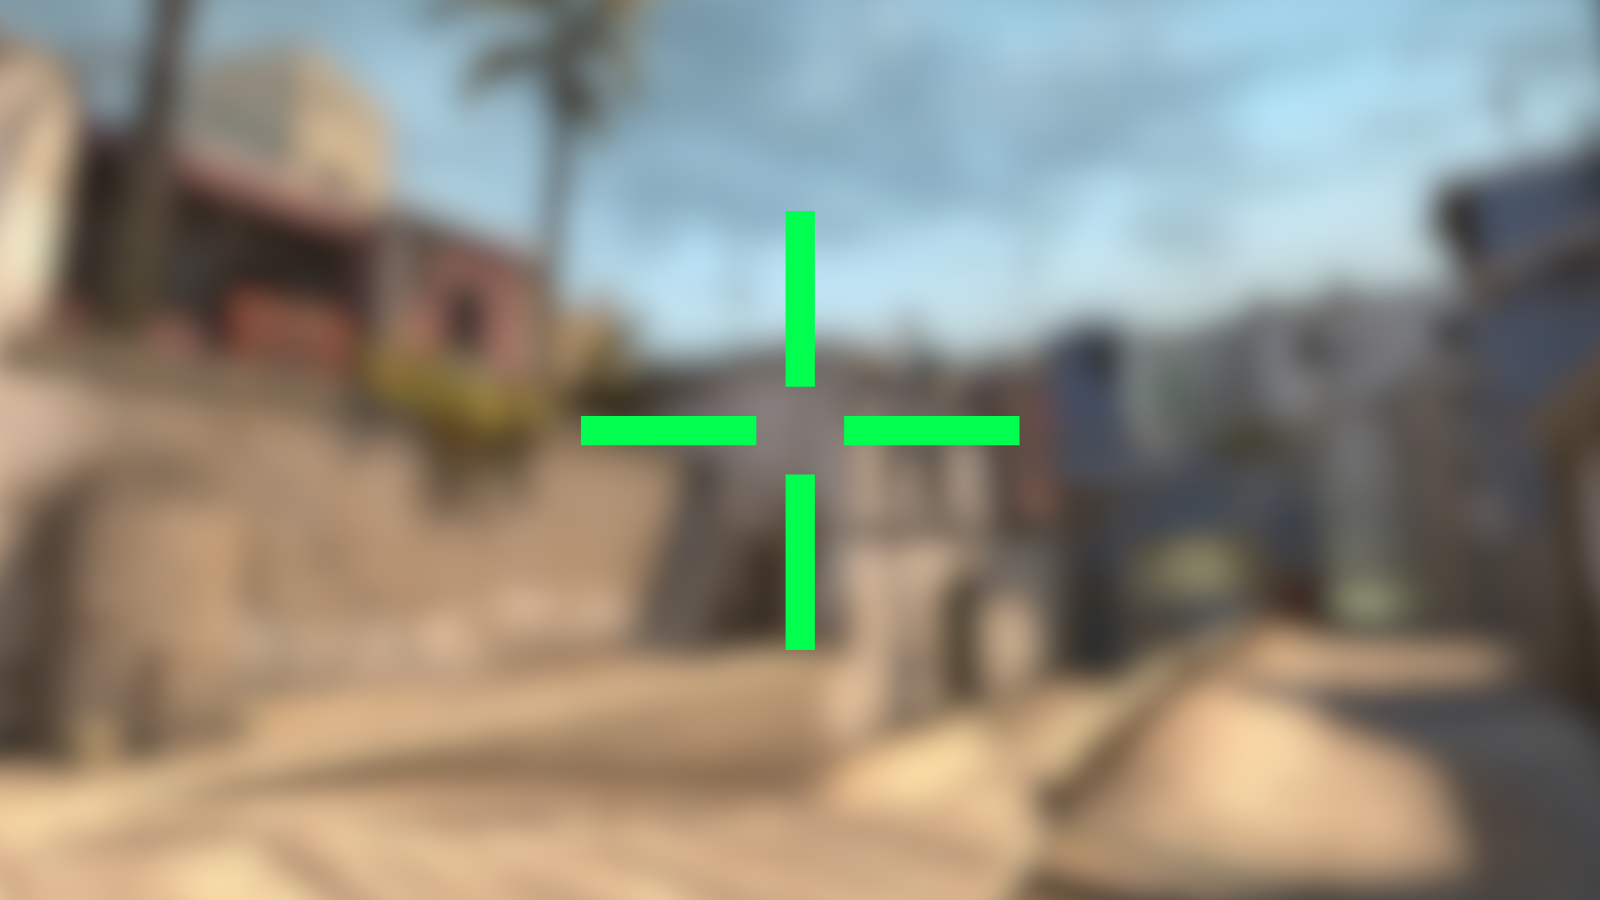 Guide To Choosing Your BEST Crosshair! Customization Settings: Useful, Or  Not? 